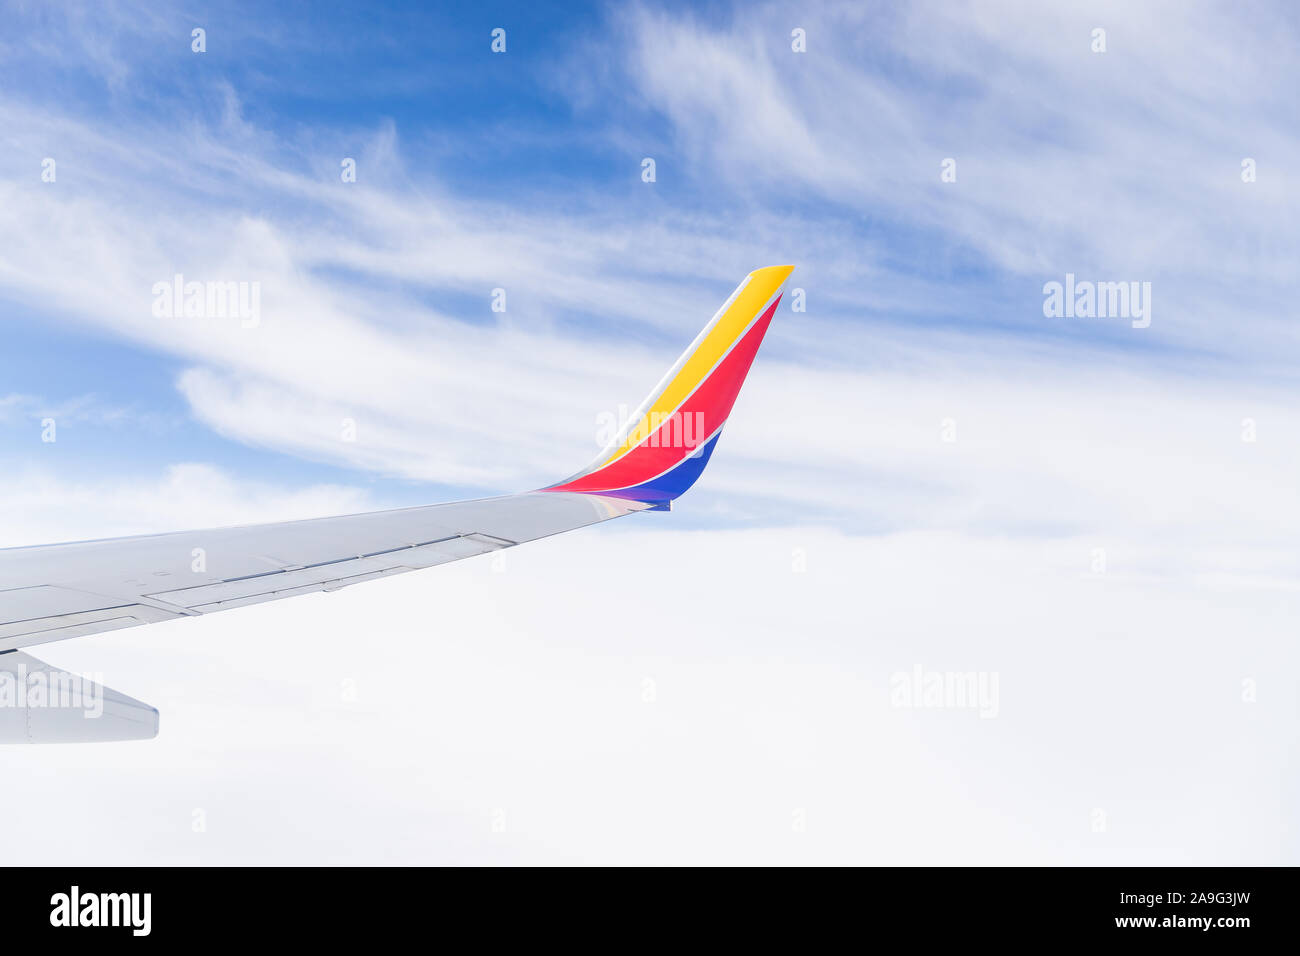 Looking out a Southwest airplane window in flight to see the wing, blue sky, and clouds. Stock Photo